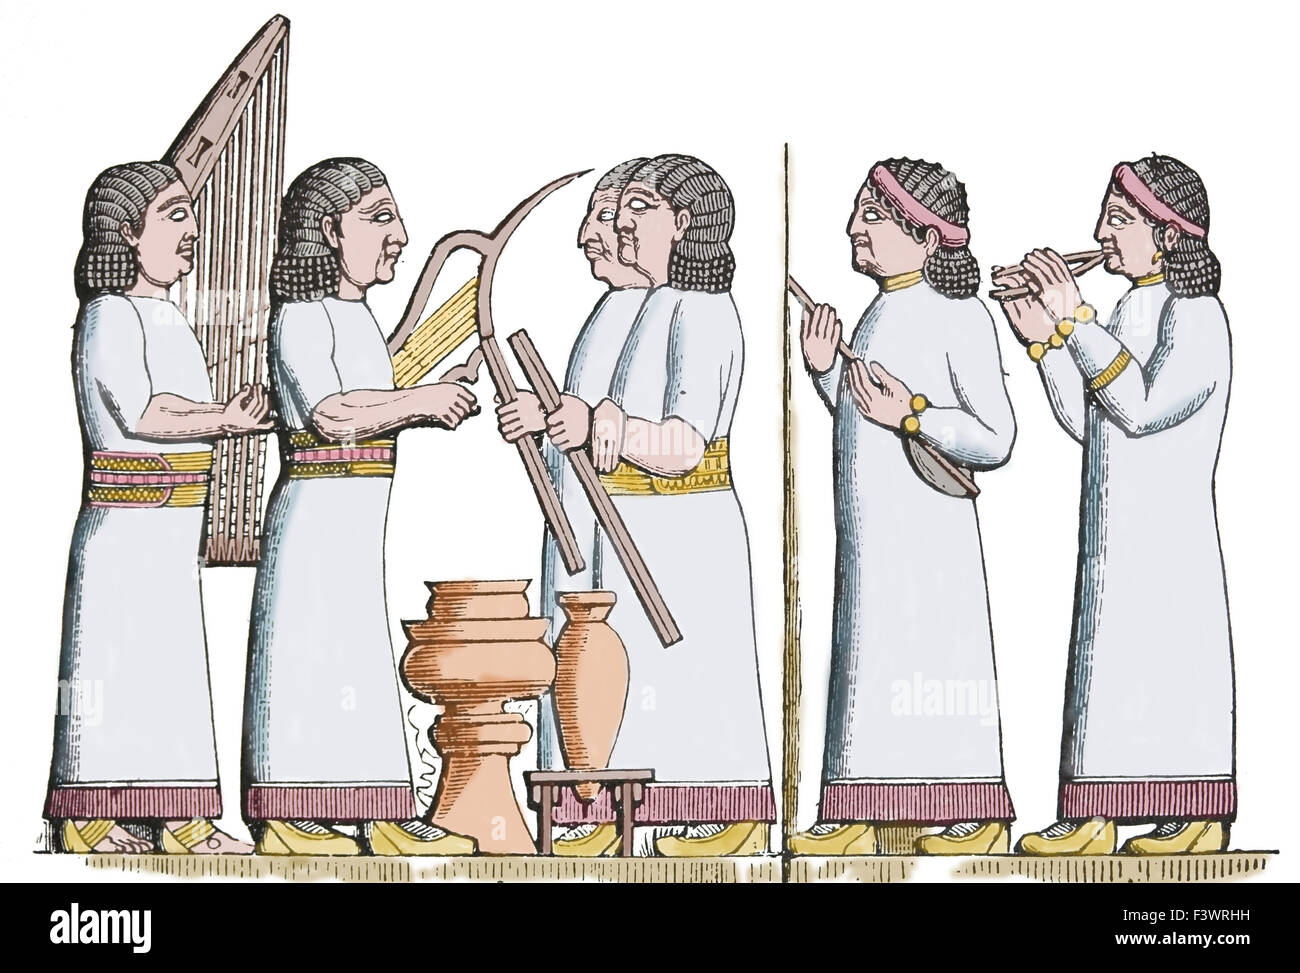 Ancient Near East. Mesopotamia. Assyria. Musicians (harp, lyre, lute, aulos). Engraving, 19th century. Color. Stock Photo